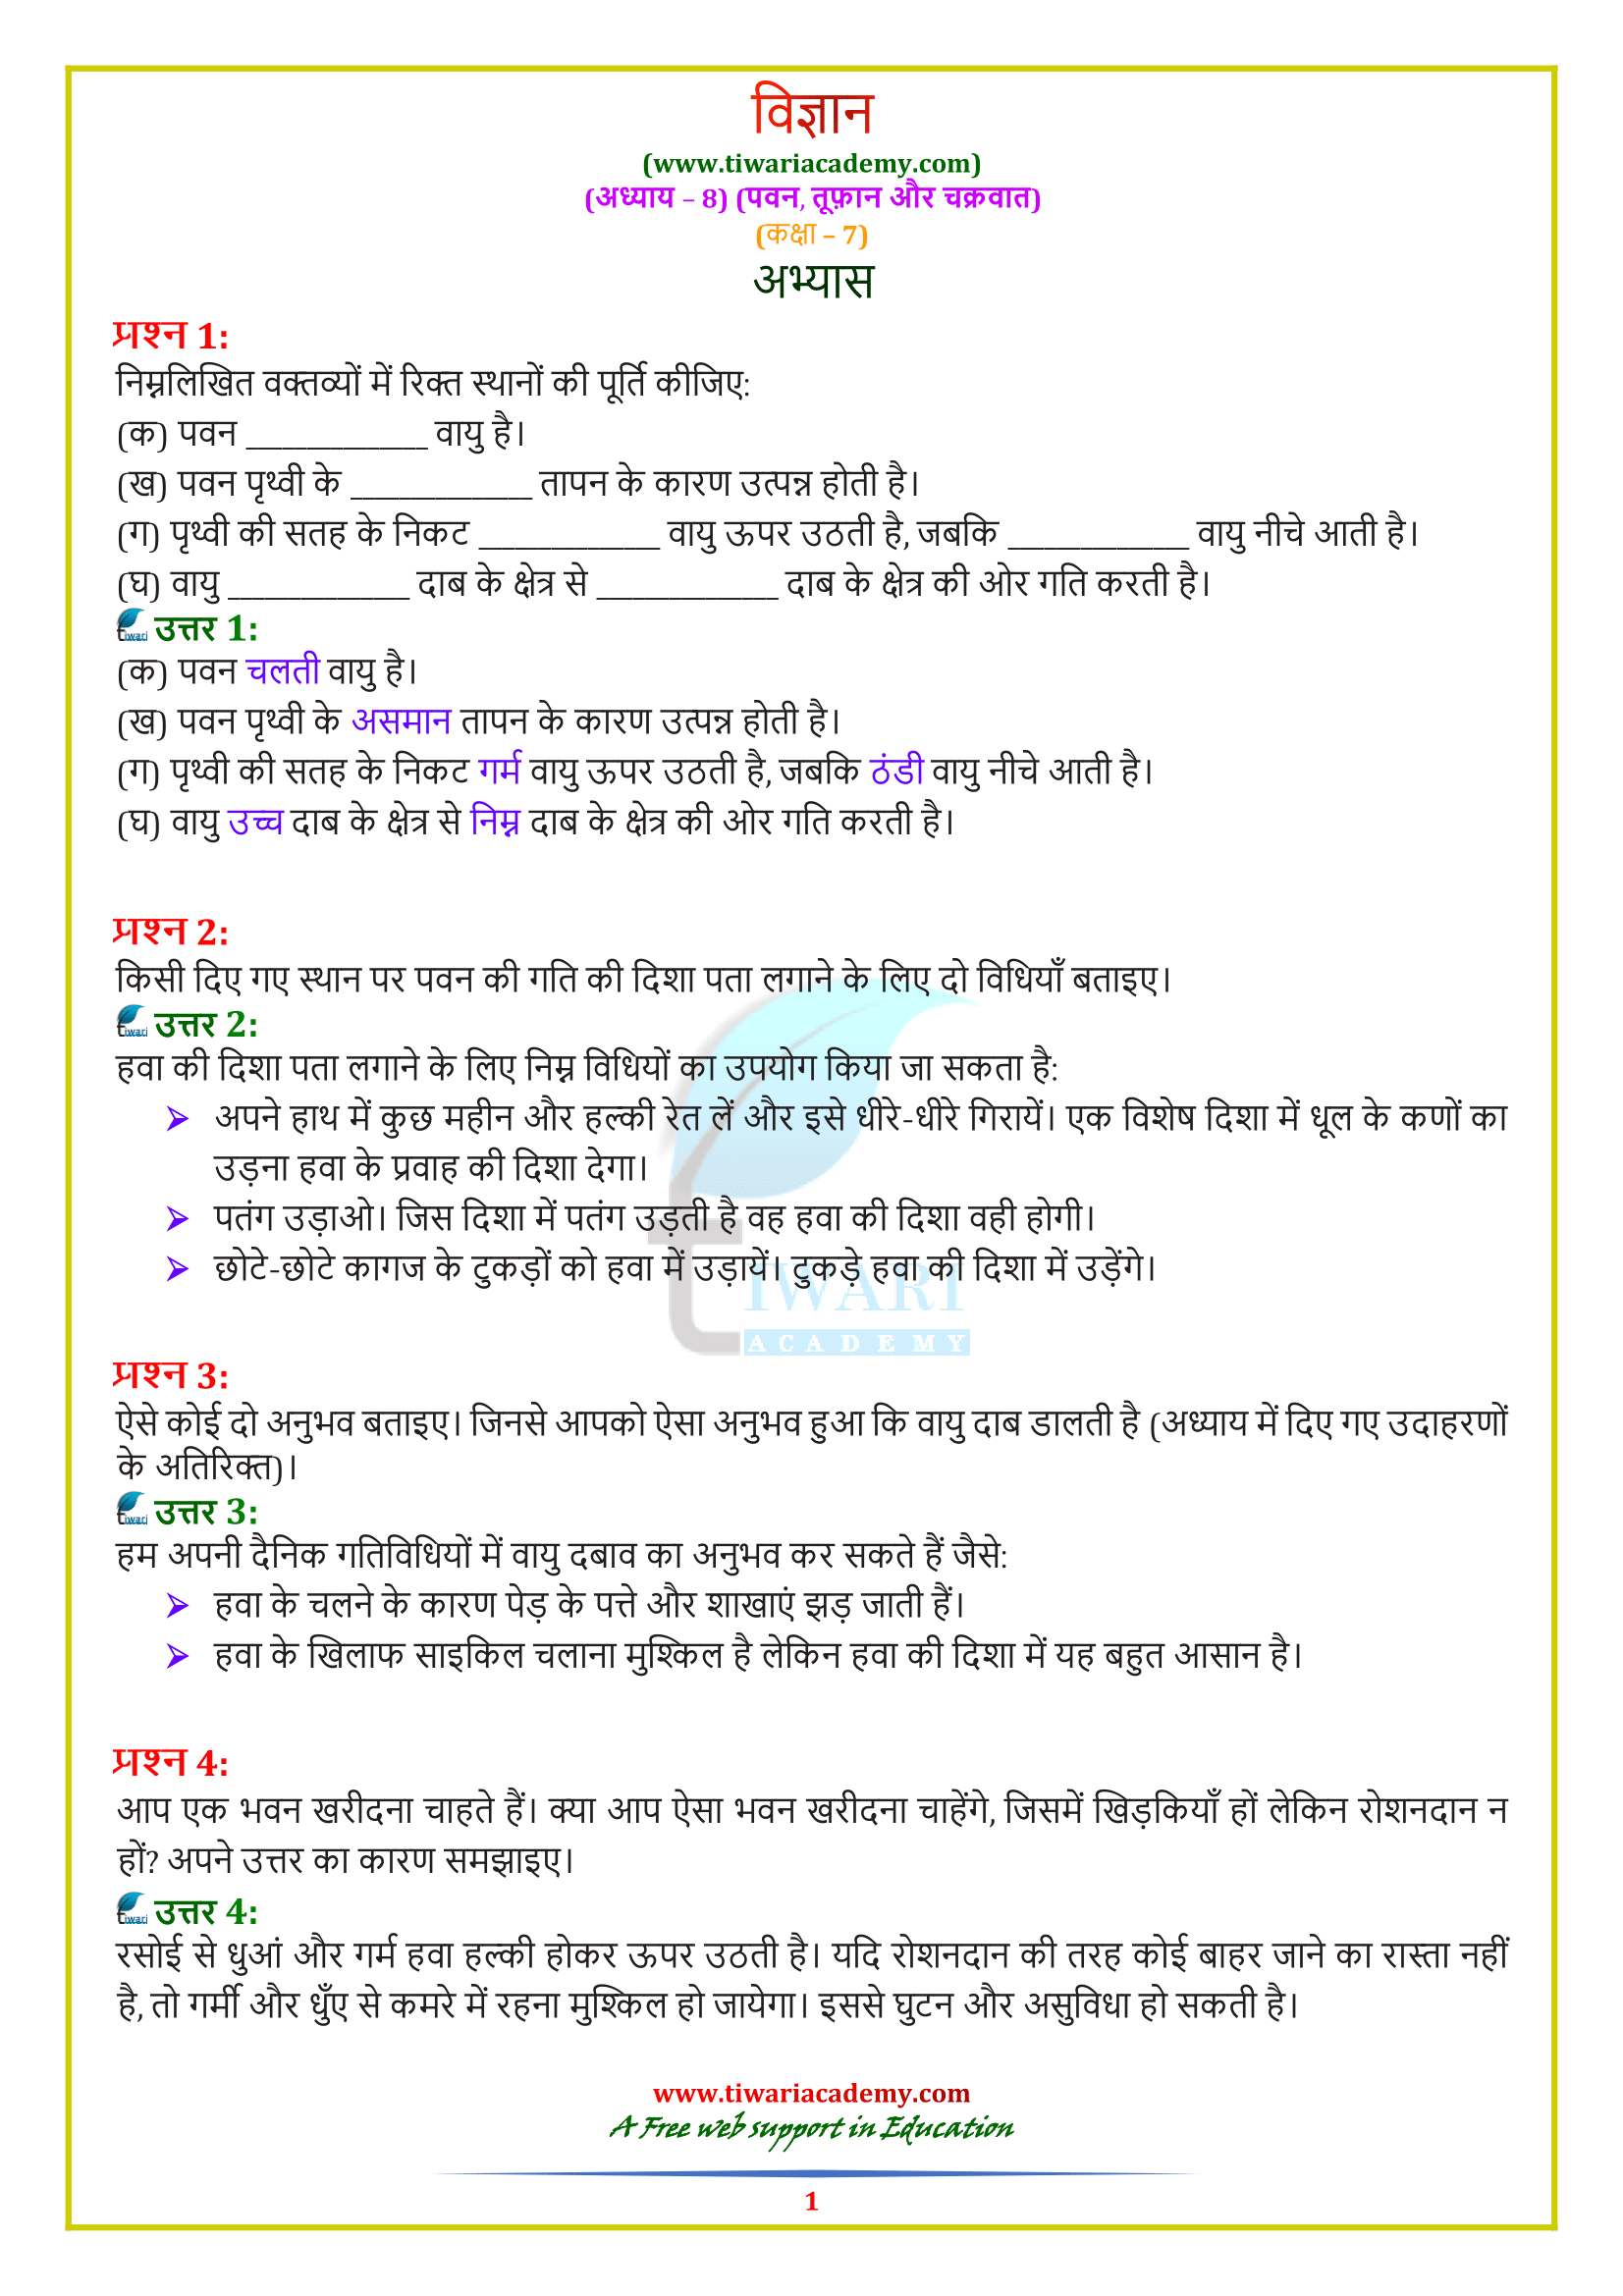 NCERT Solutions for Class 7 Science अध्याय 8